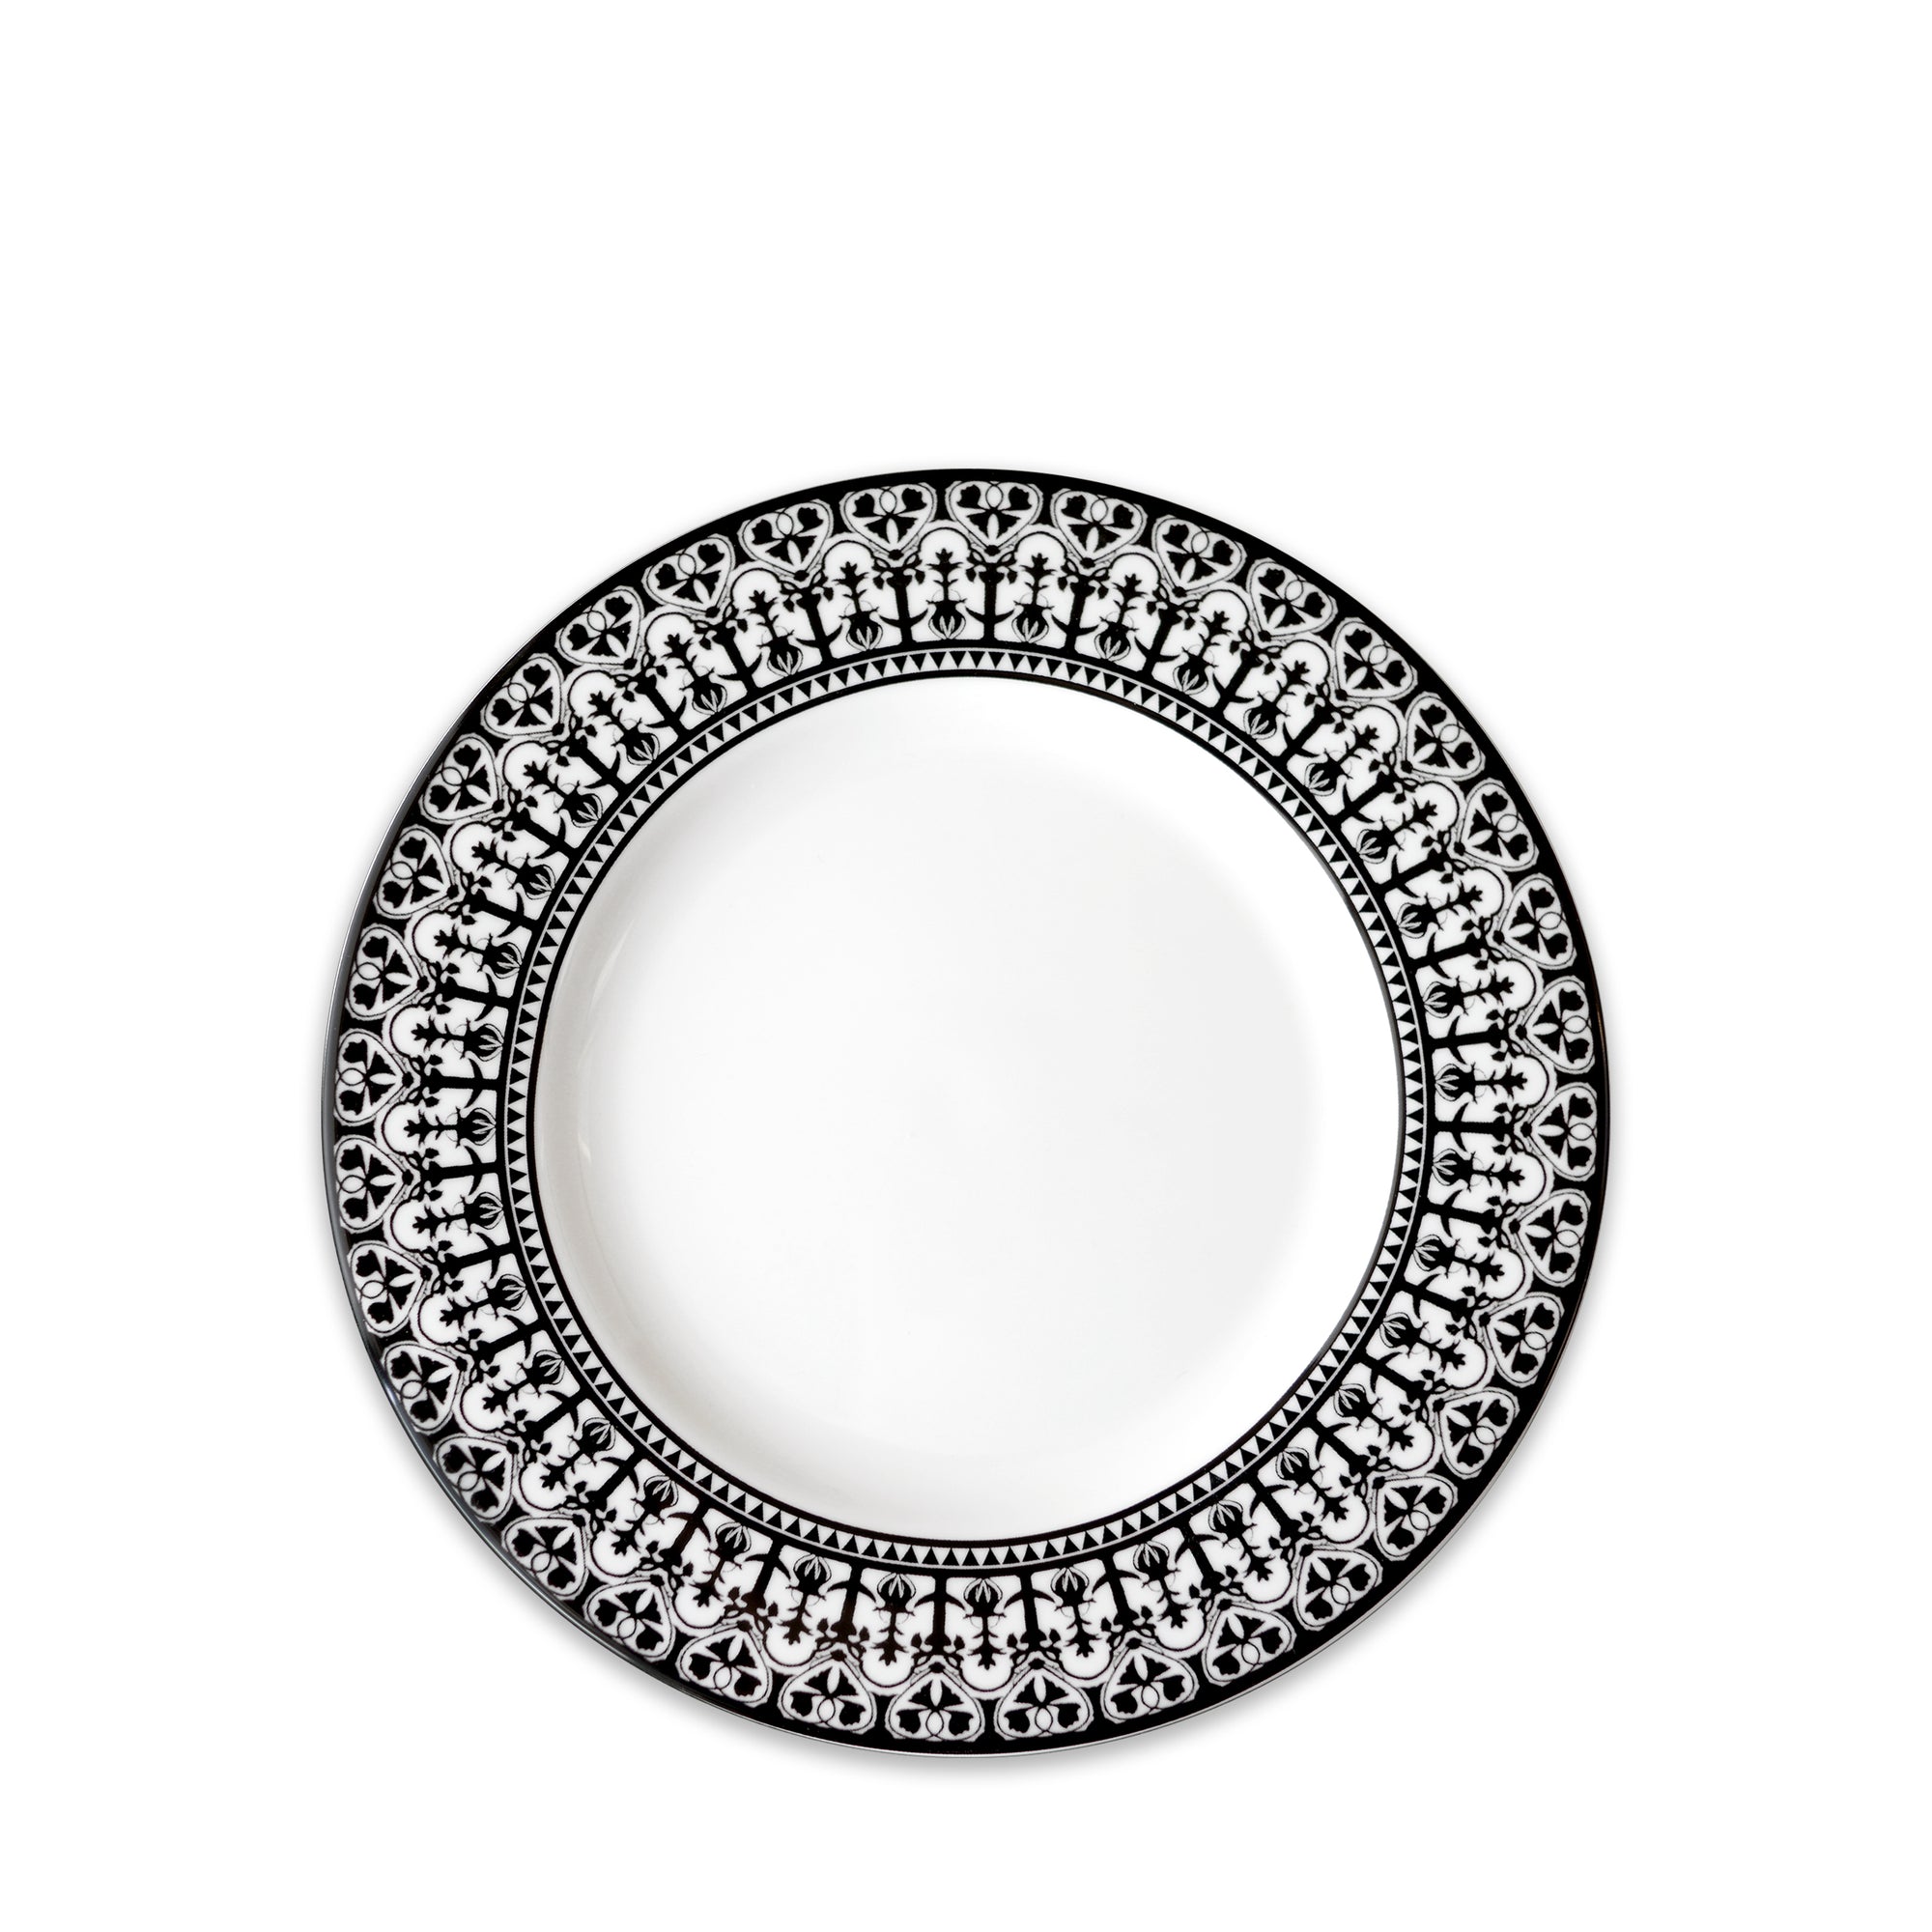 A round, white porcelain plate with an intricate black and white patterned border, part of the elegant Casablanca Rimmed Salad Plate collection by Caskata Artisanal Home.